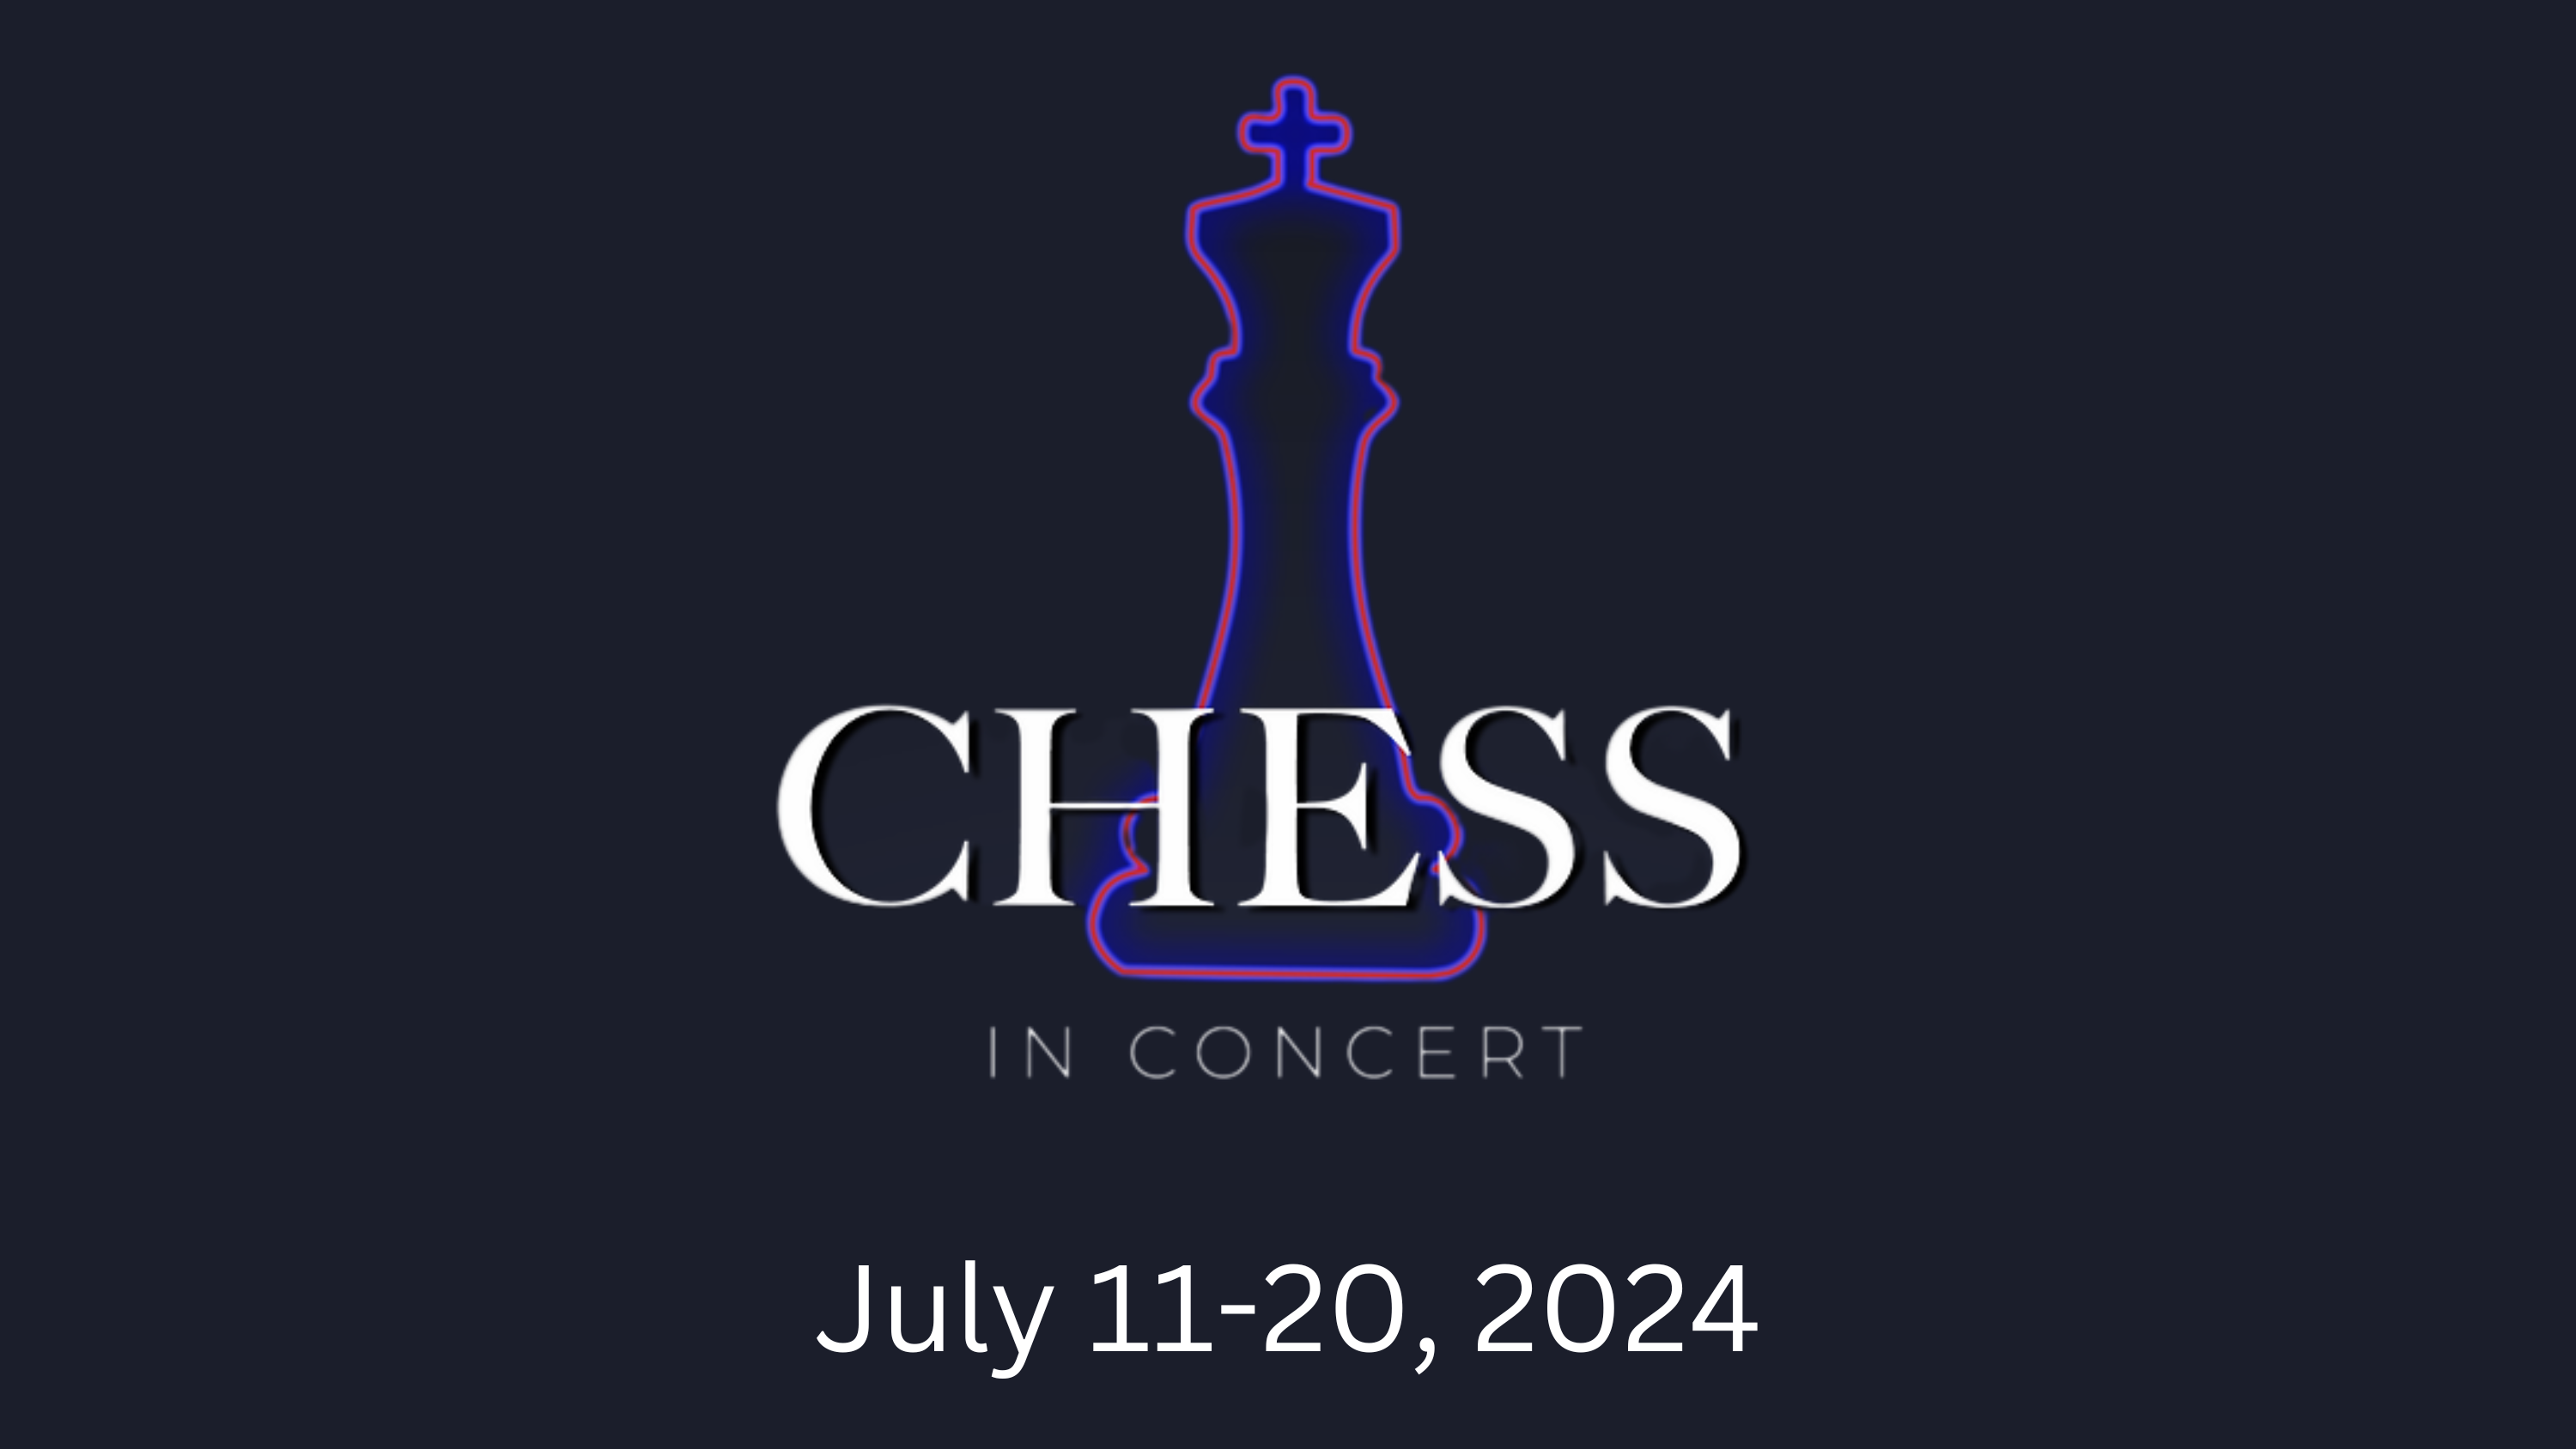 Chess in concert July 11-20